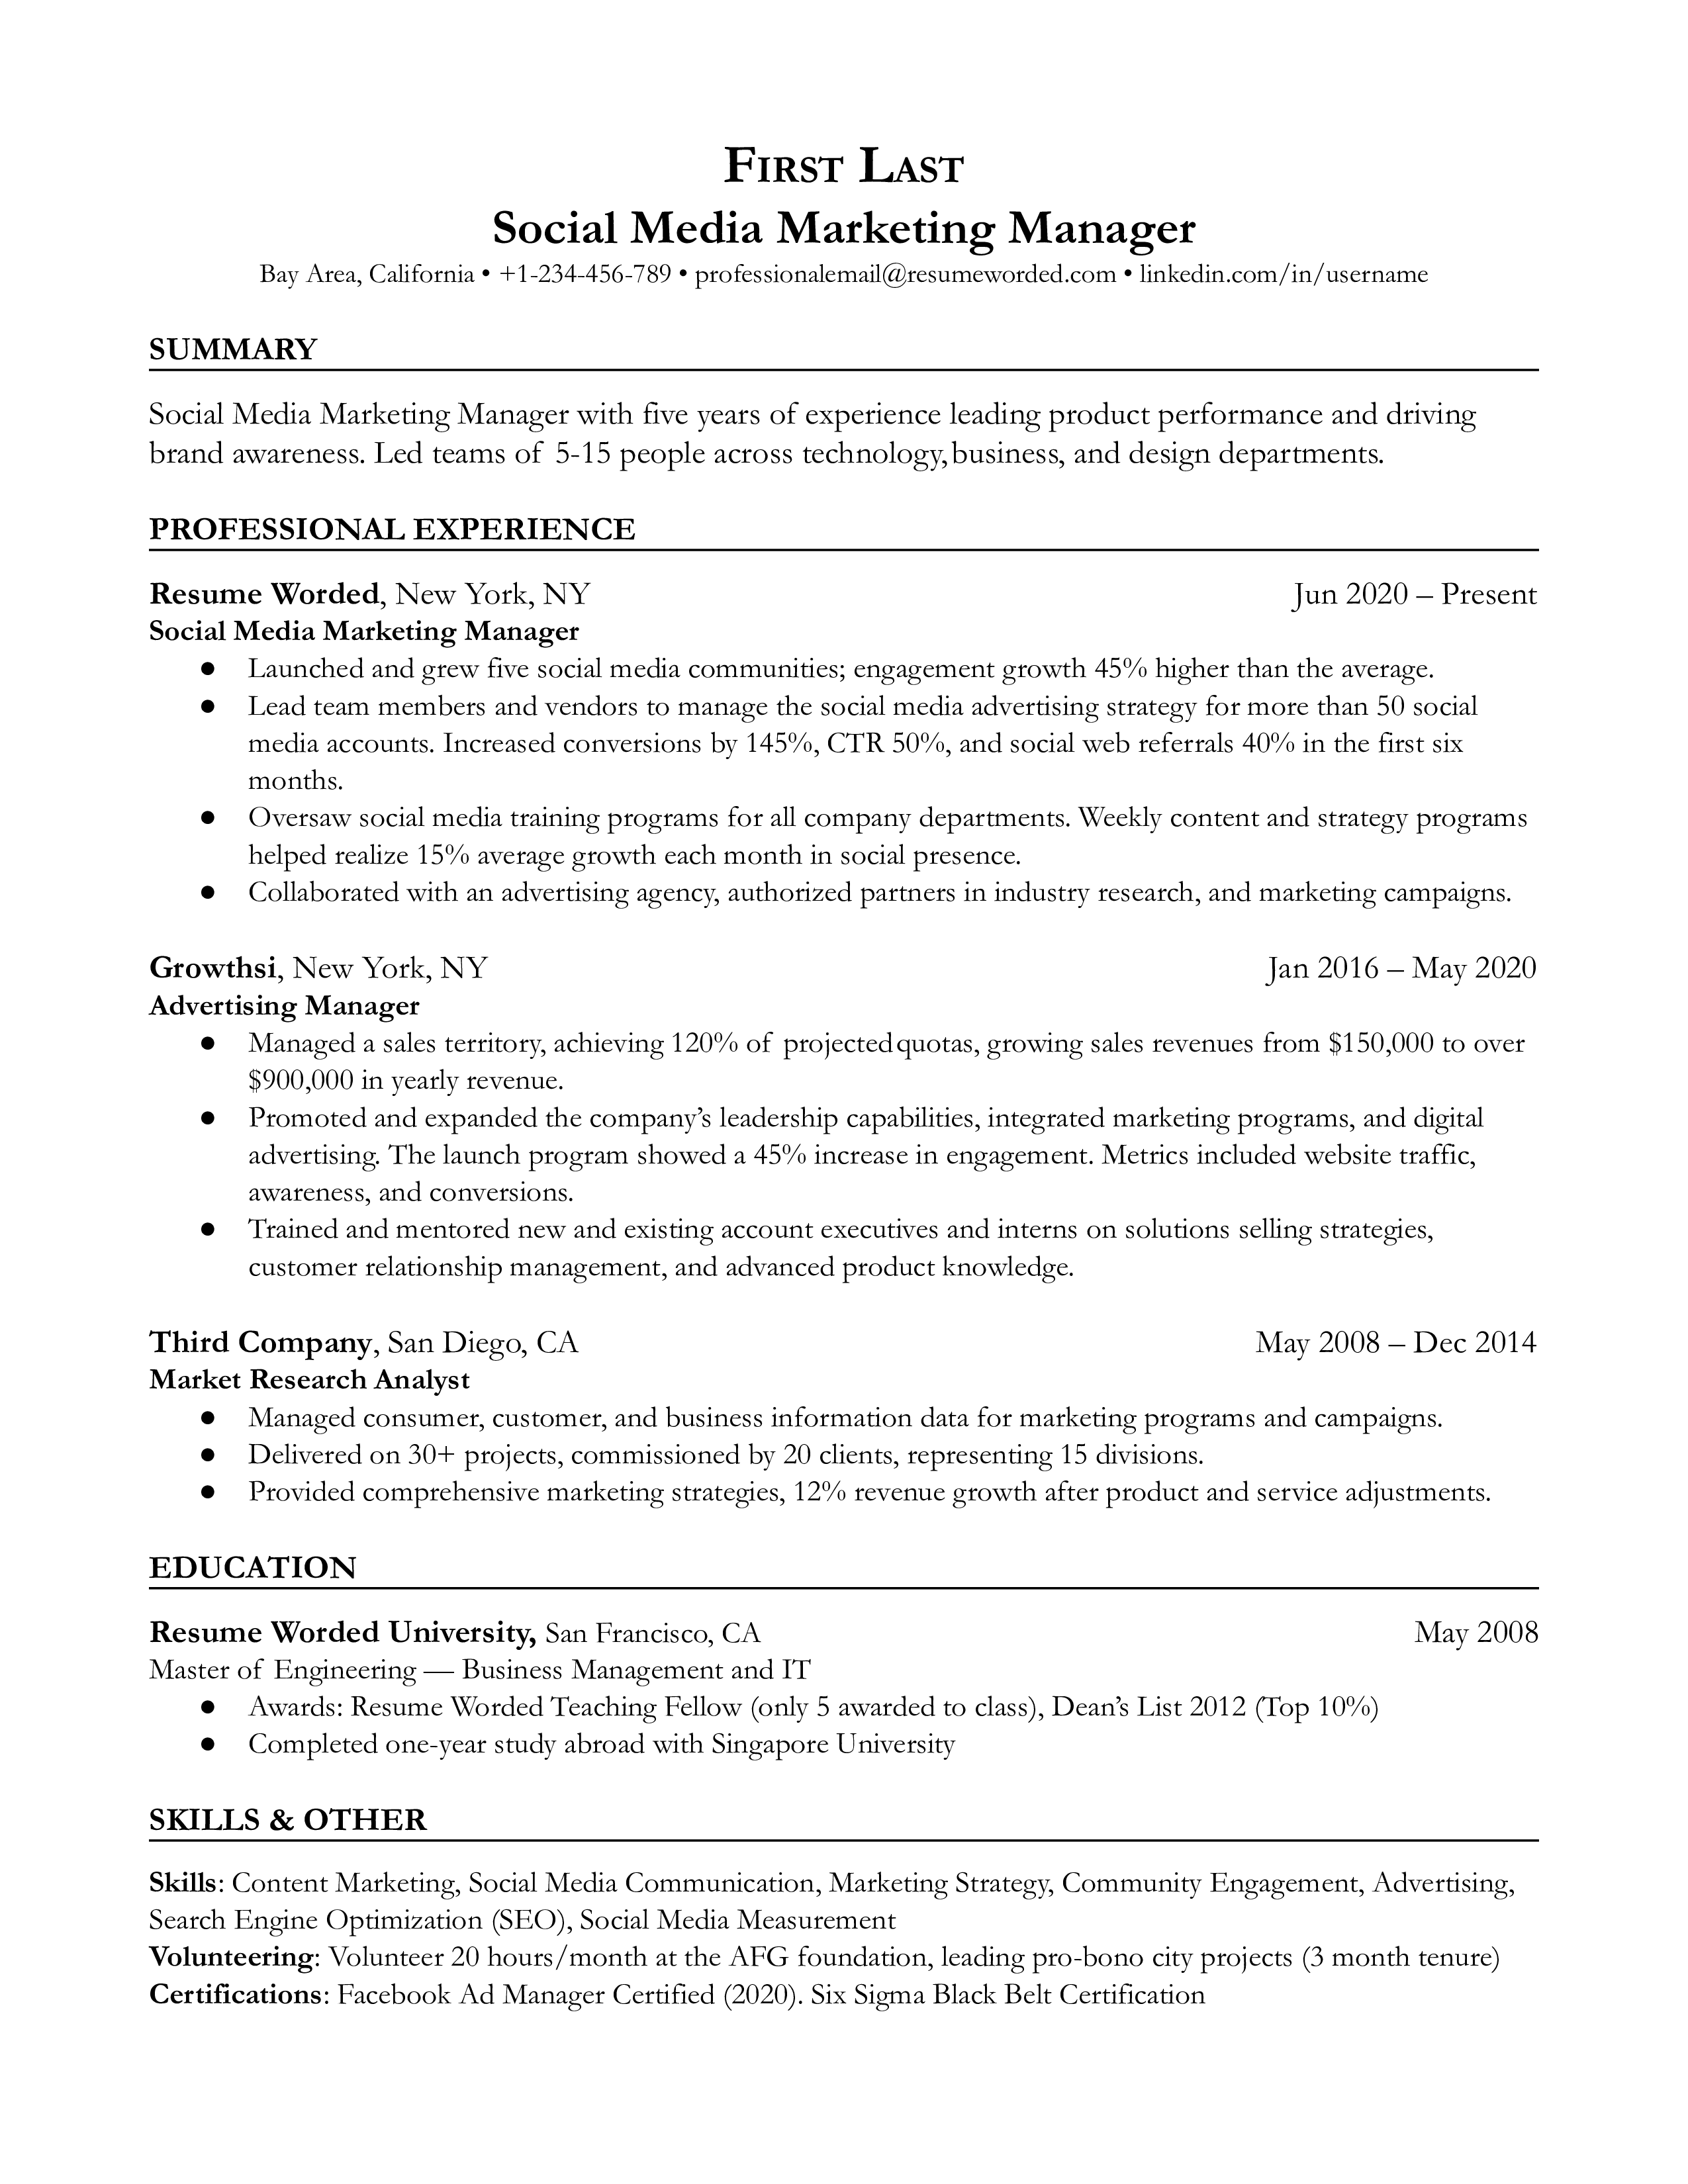 Social Media Marketing Manager's CV showcasing their creativity and data-driven results.